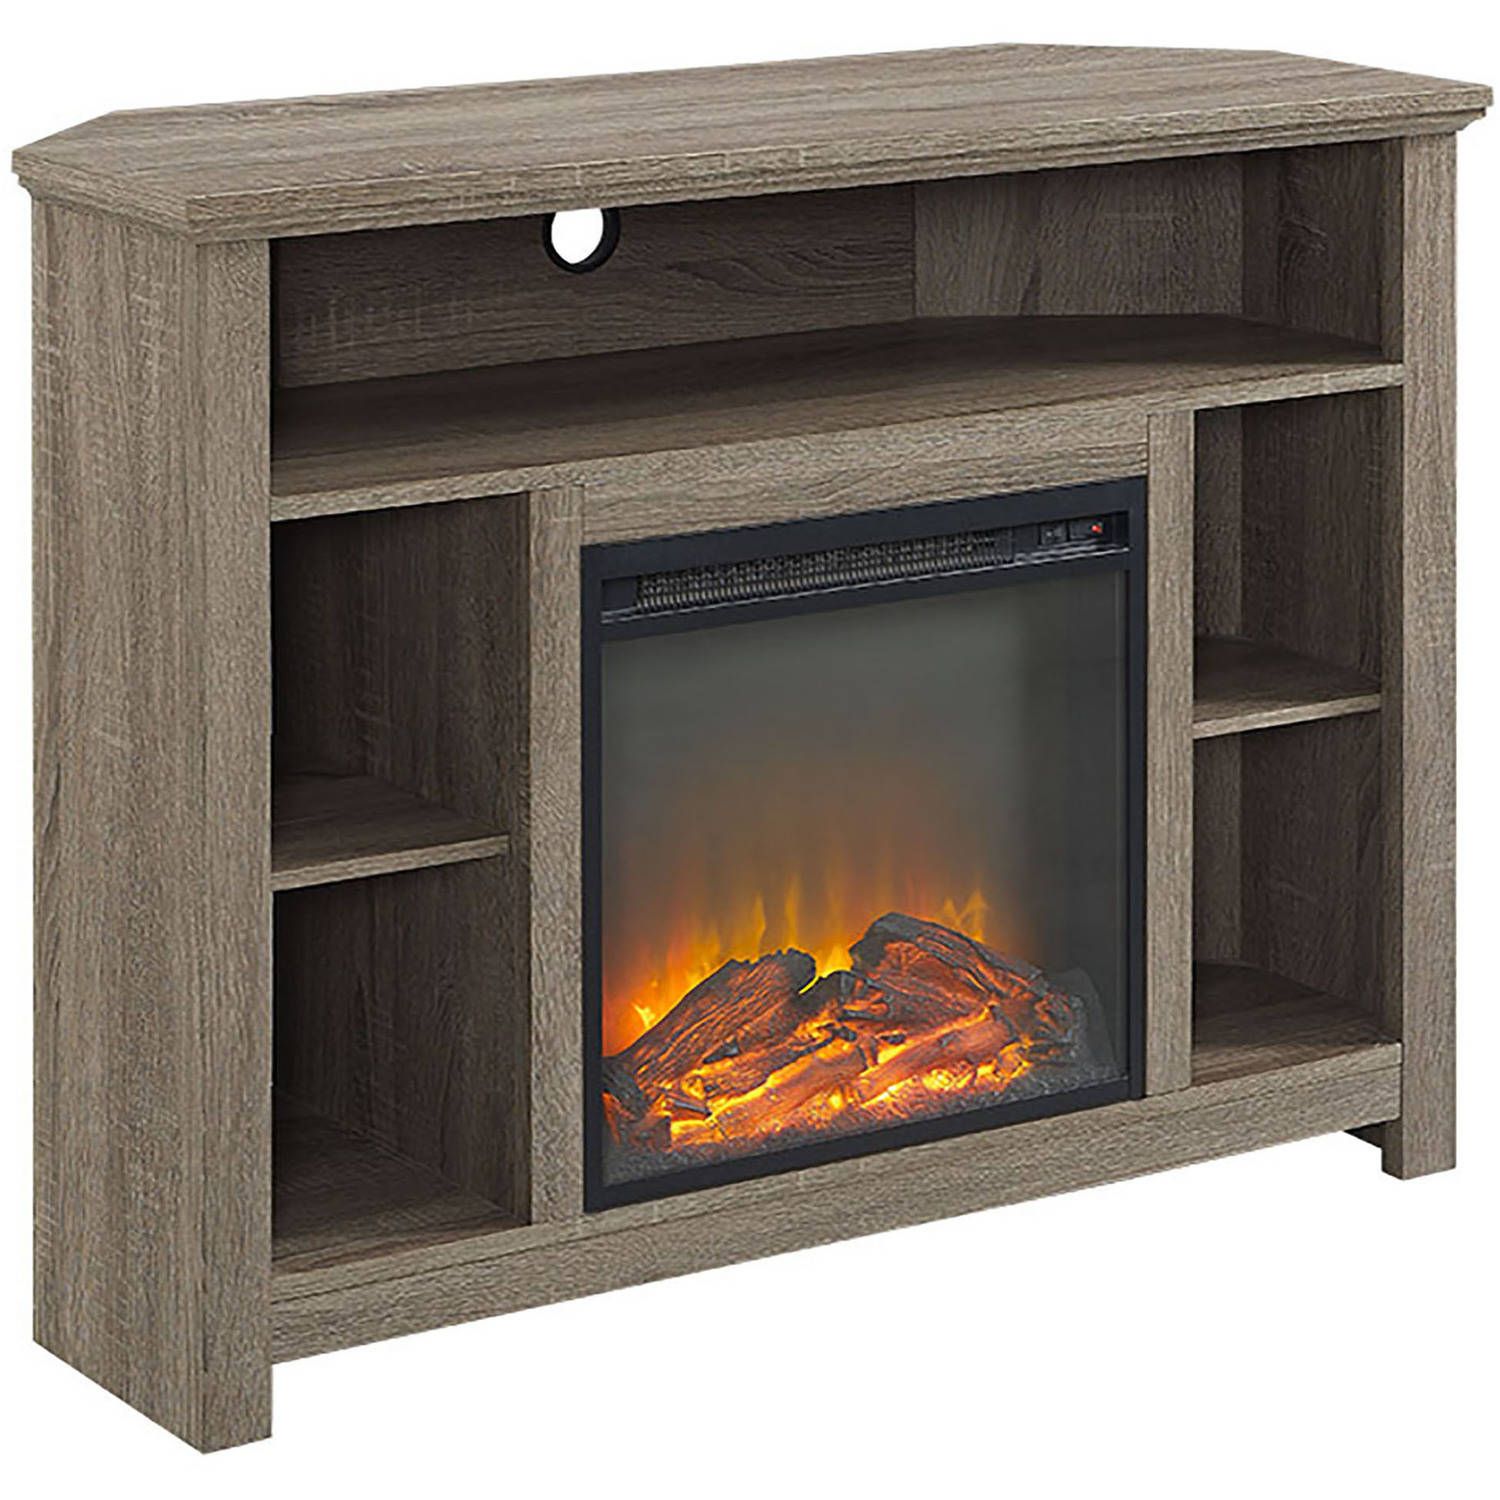 Driftwood Tv Stand With Fireplace Corner Mantel Electronic Inside Corner Tv Stands For 60 Inch Tv (View 9 of 15)